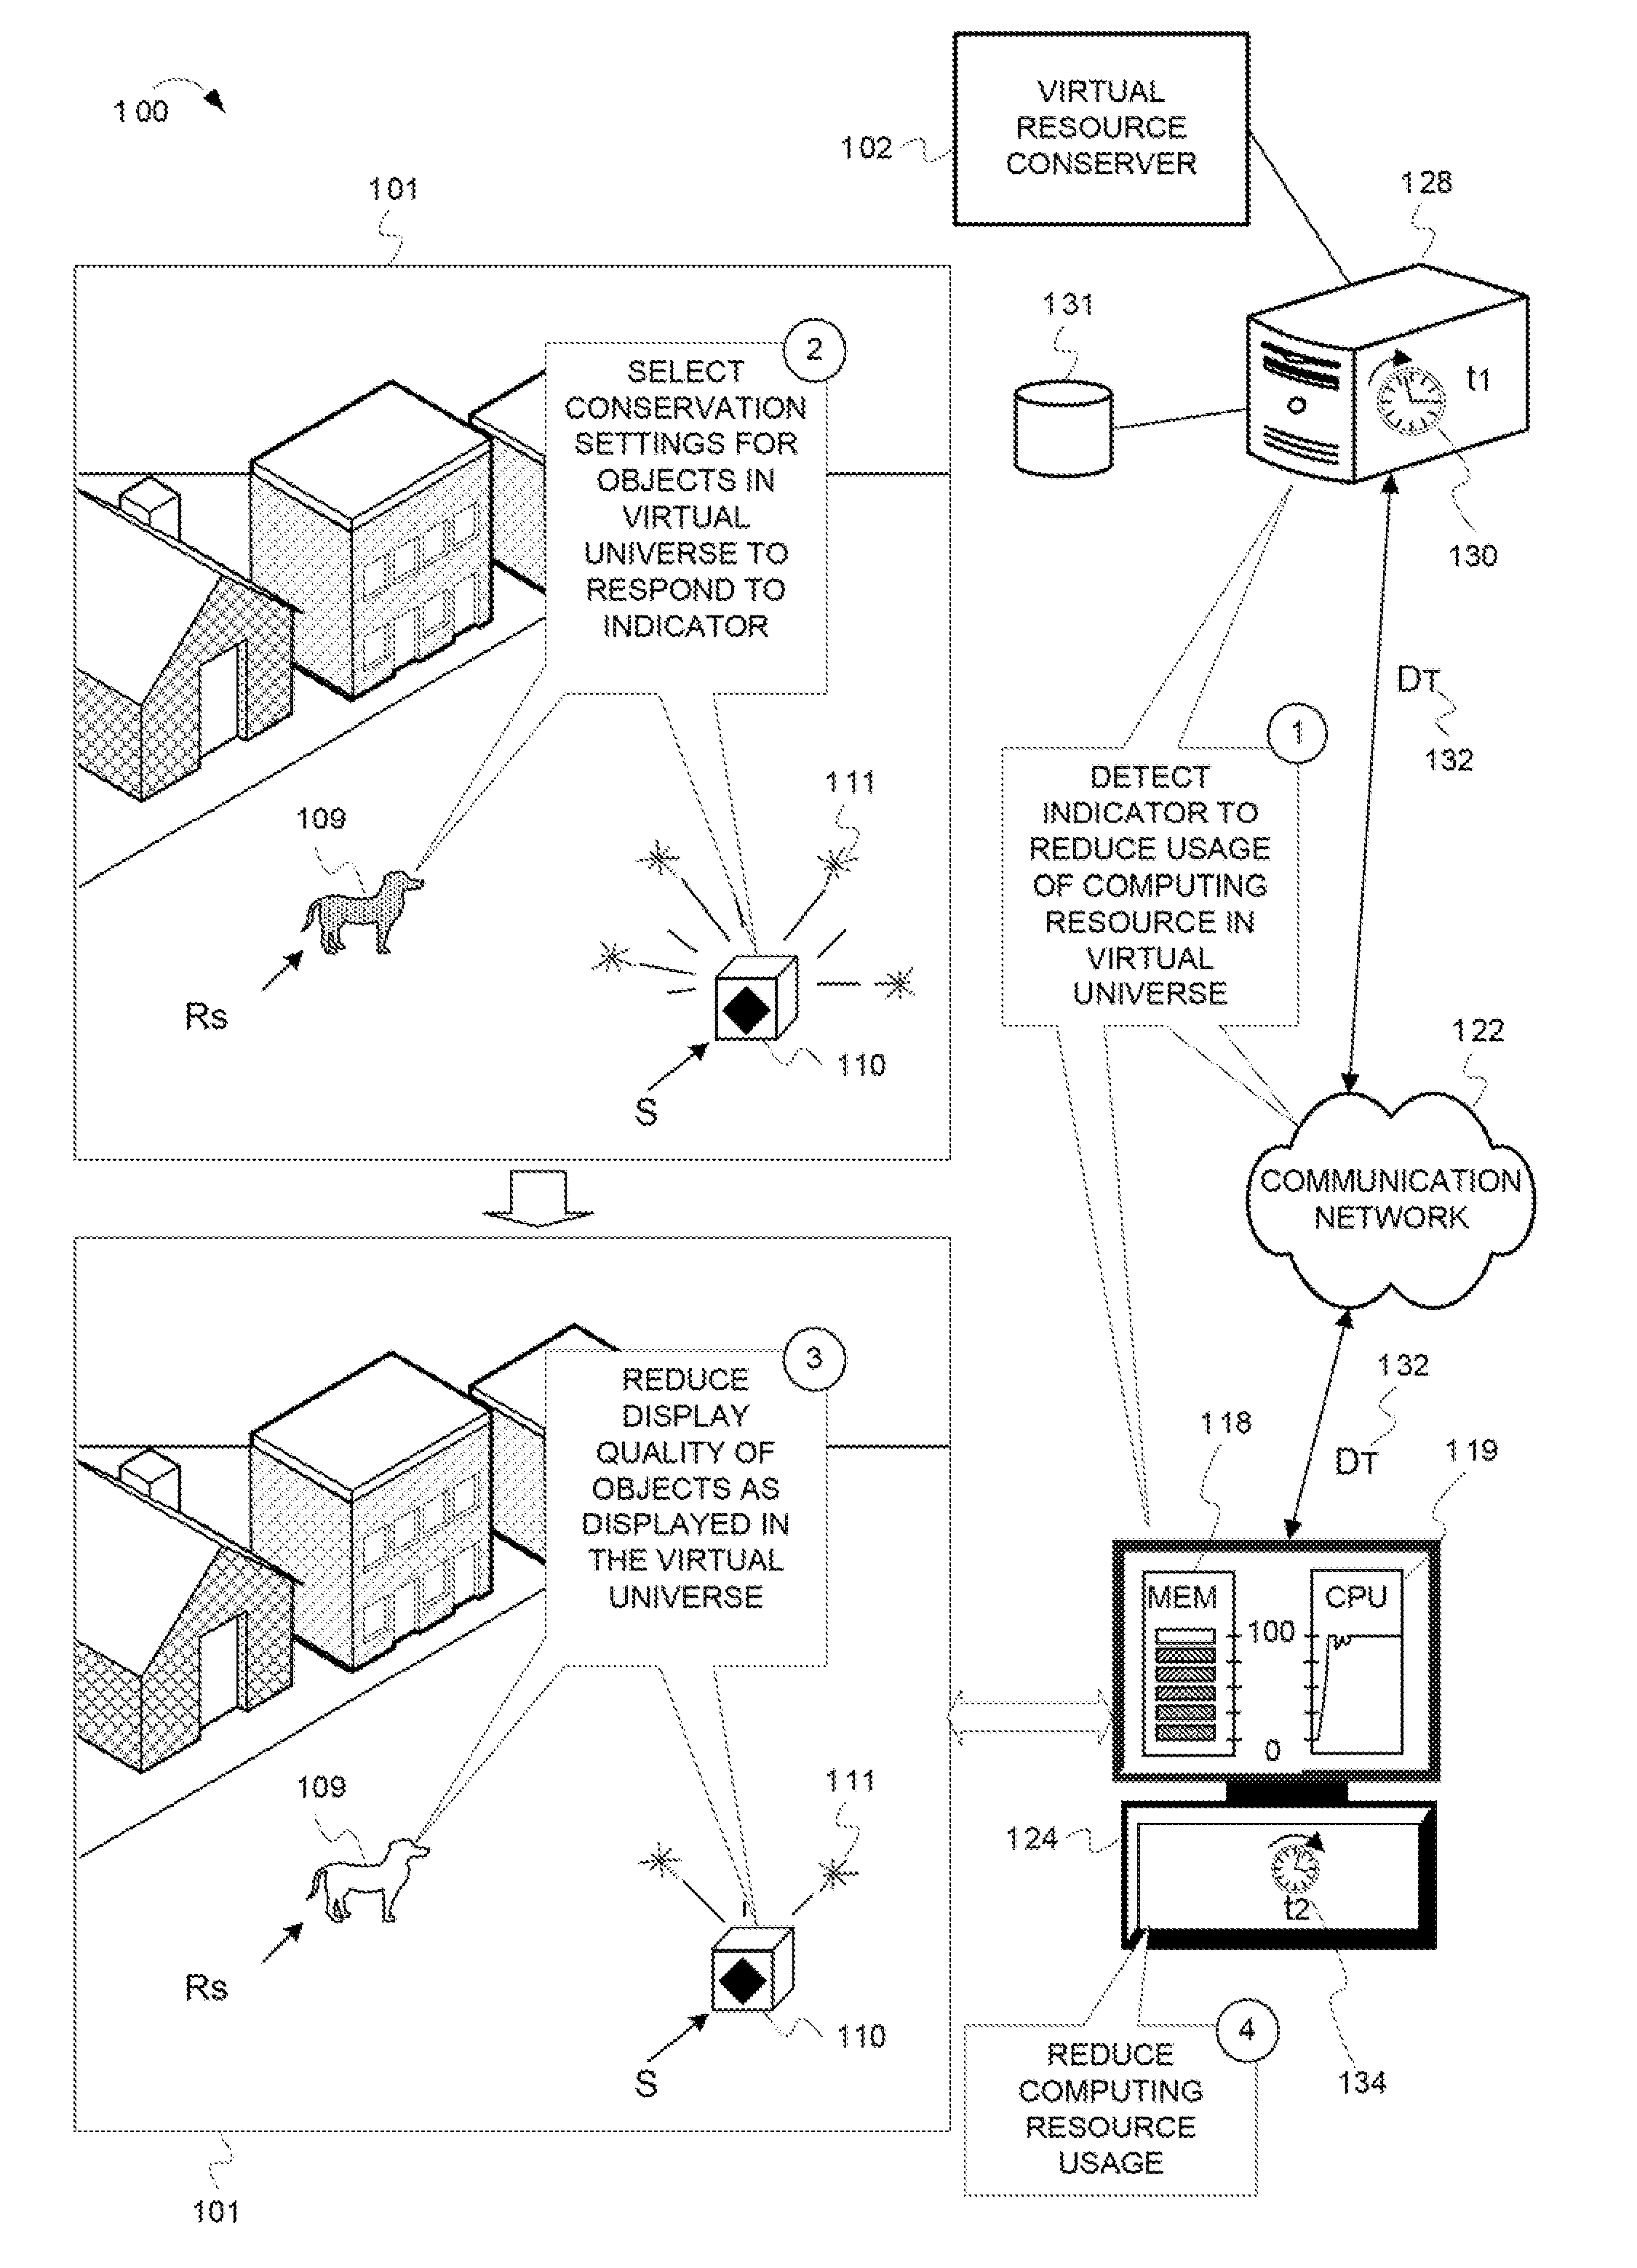 Reducing a display quality of an area in a virtual universe to conserve computing resources